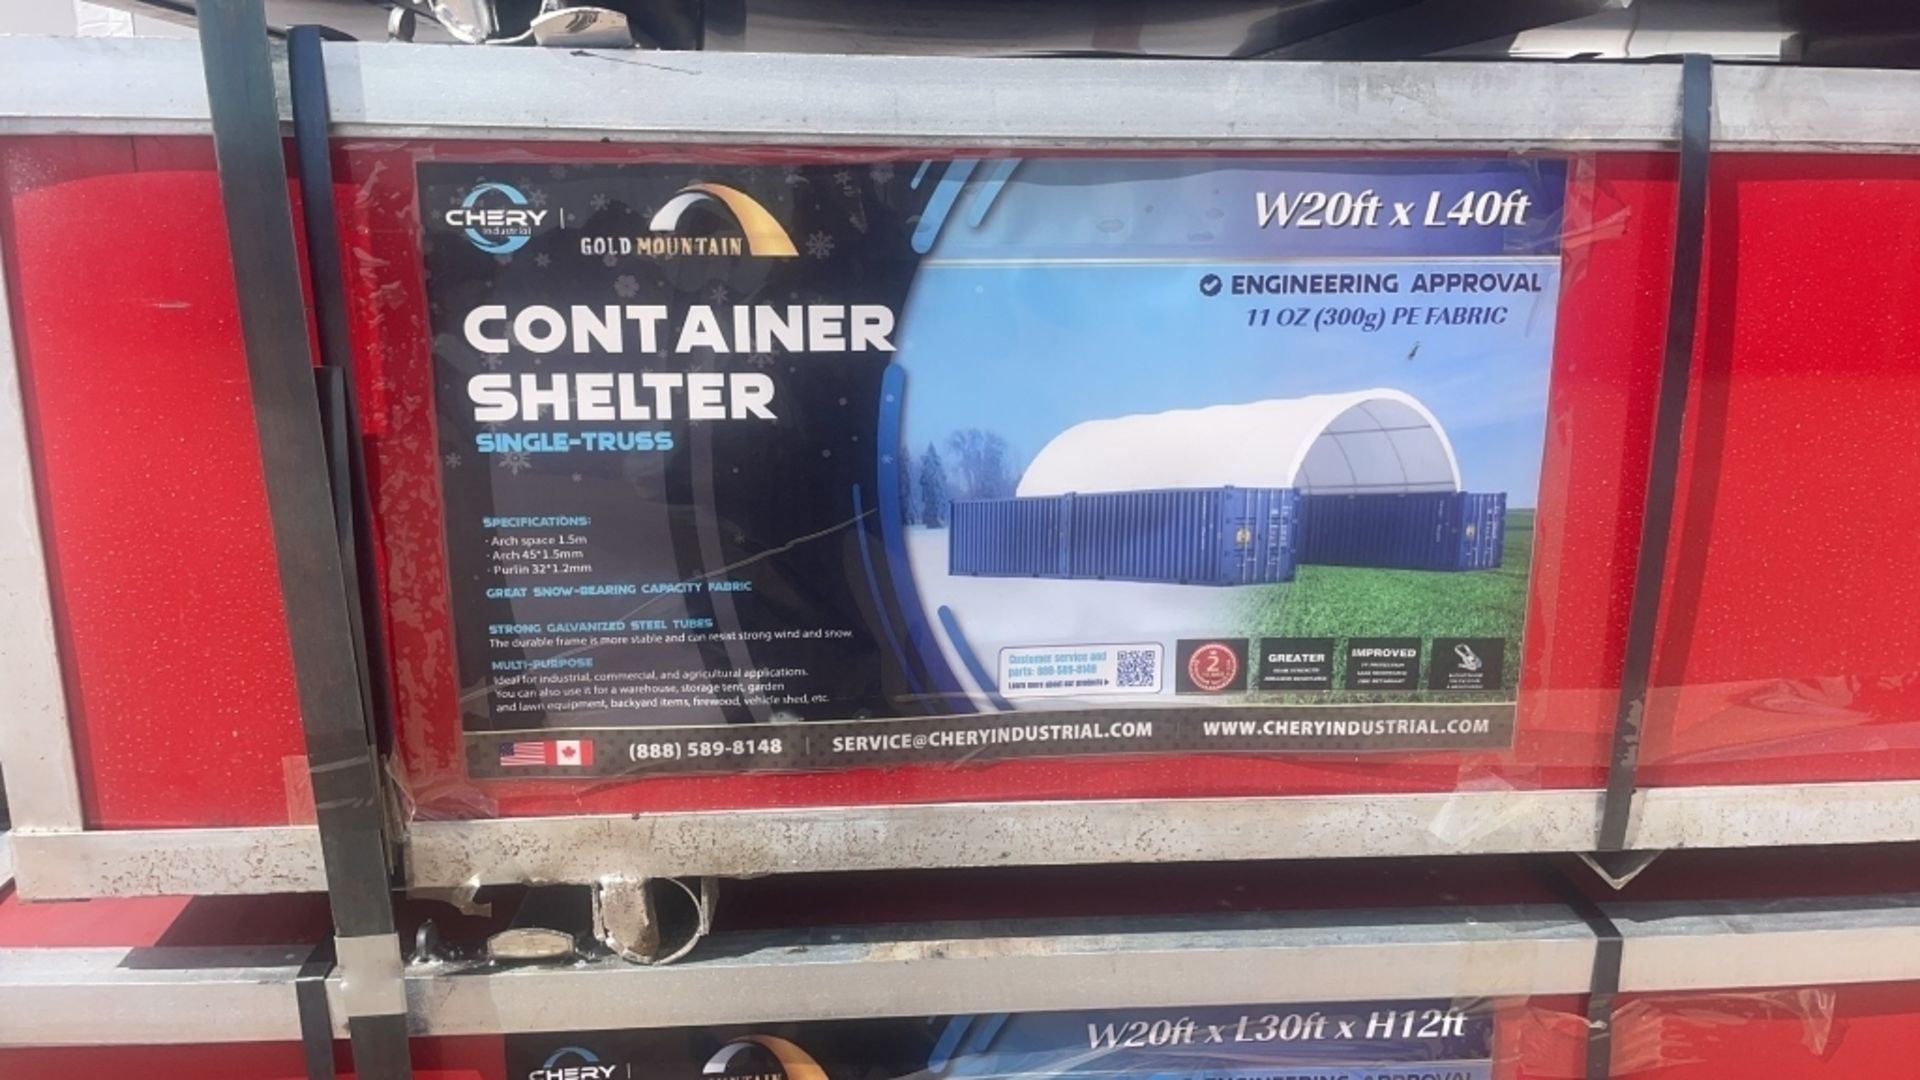 Unused 20x40 Dome Container Shelter in broken box - Image 2 of 8